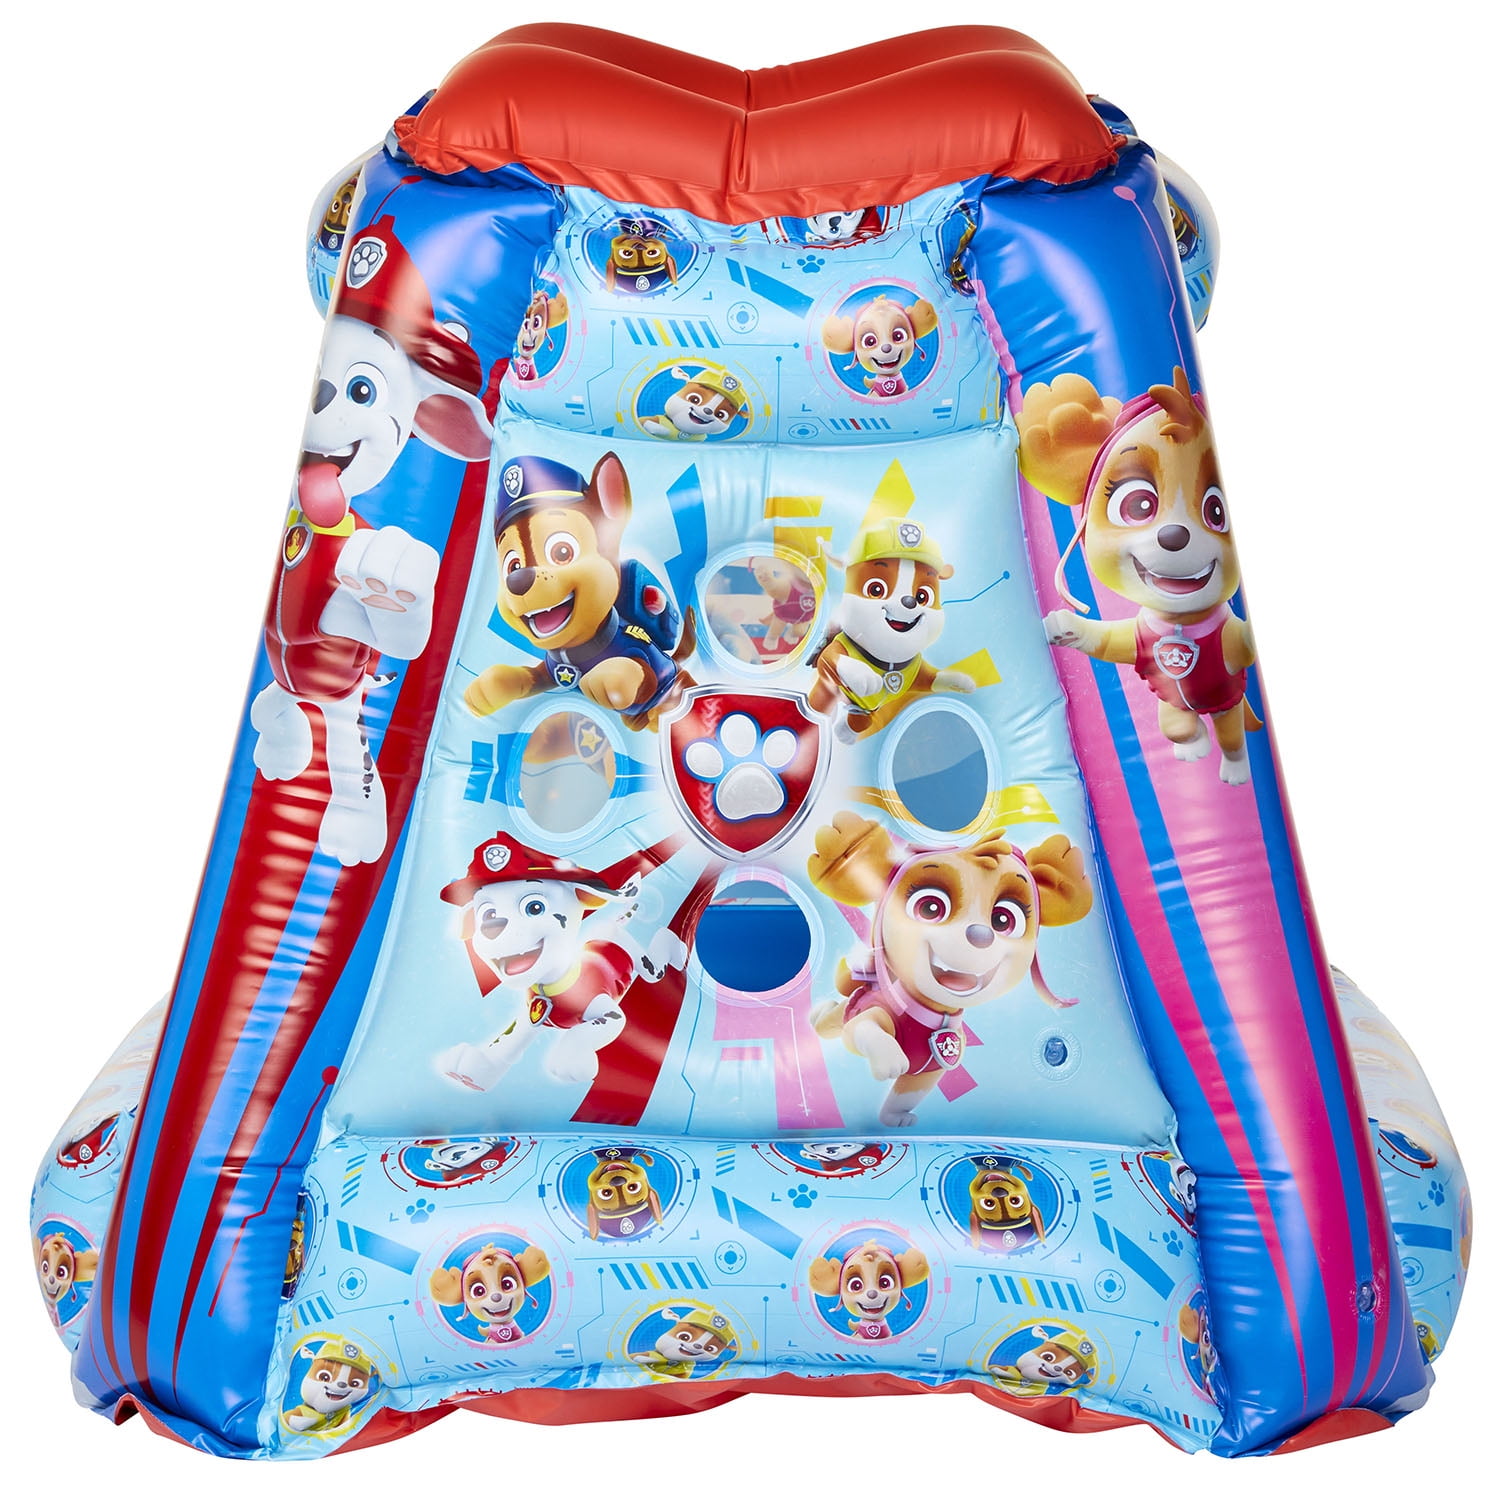 Paw Patrol Inflatable Playland Ball Pit with 20 Balls 